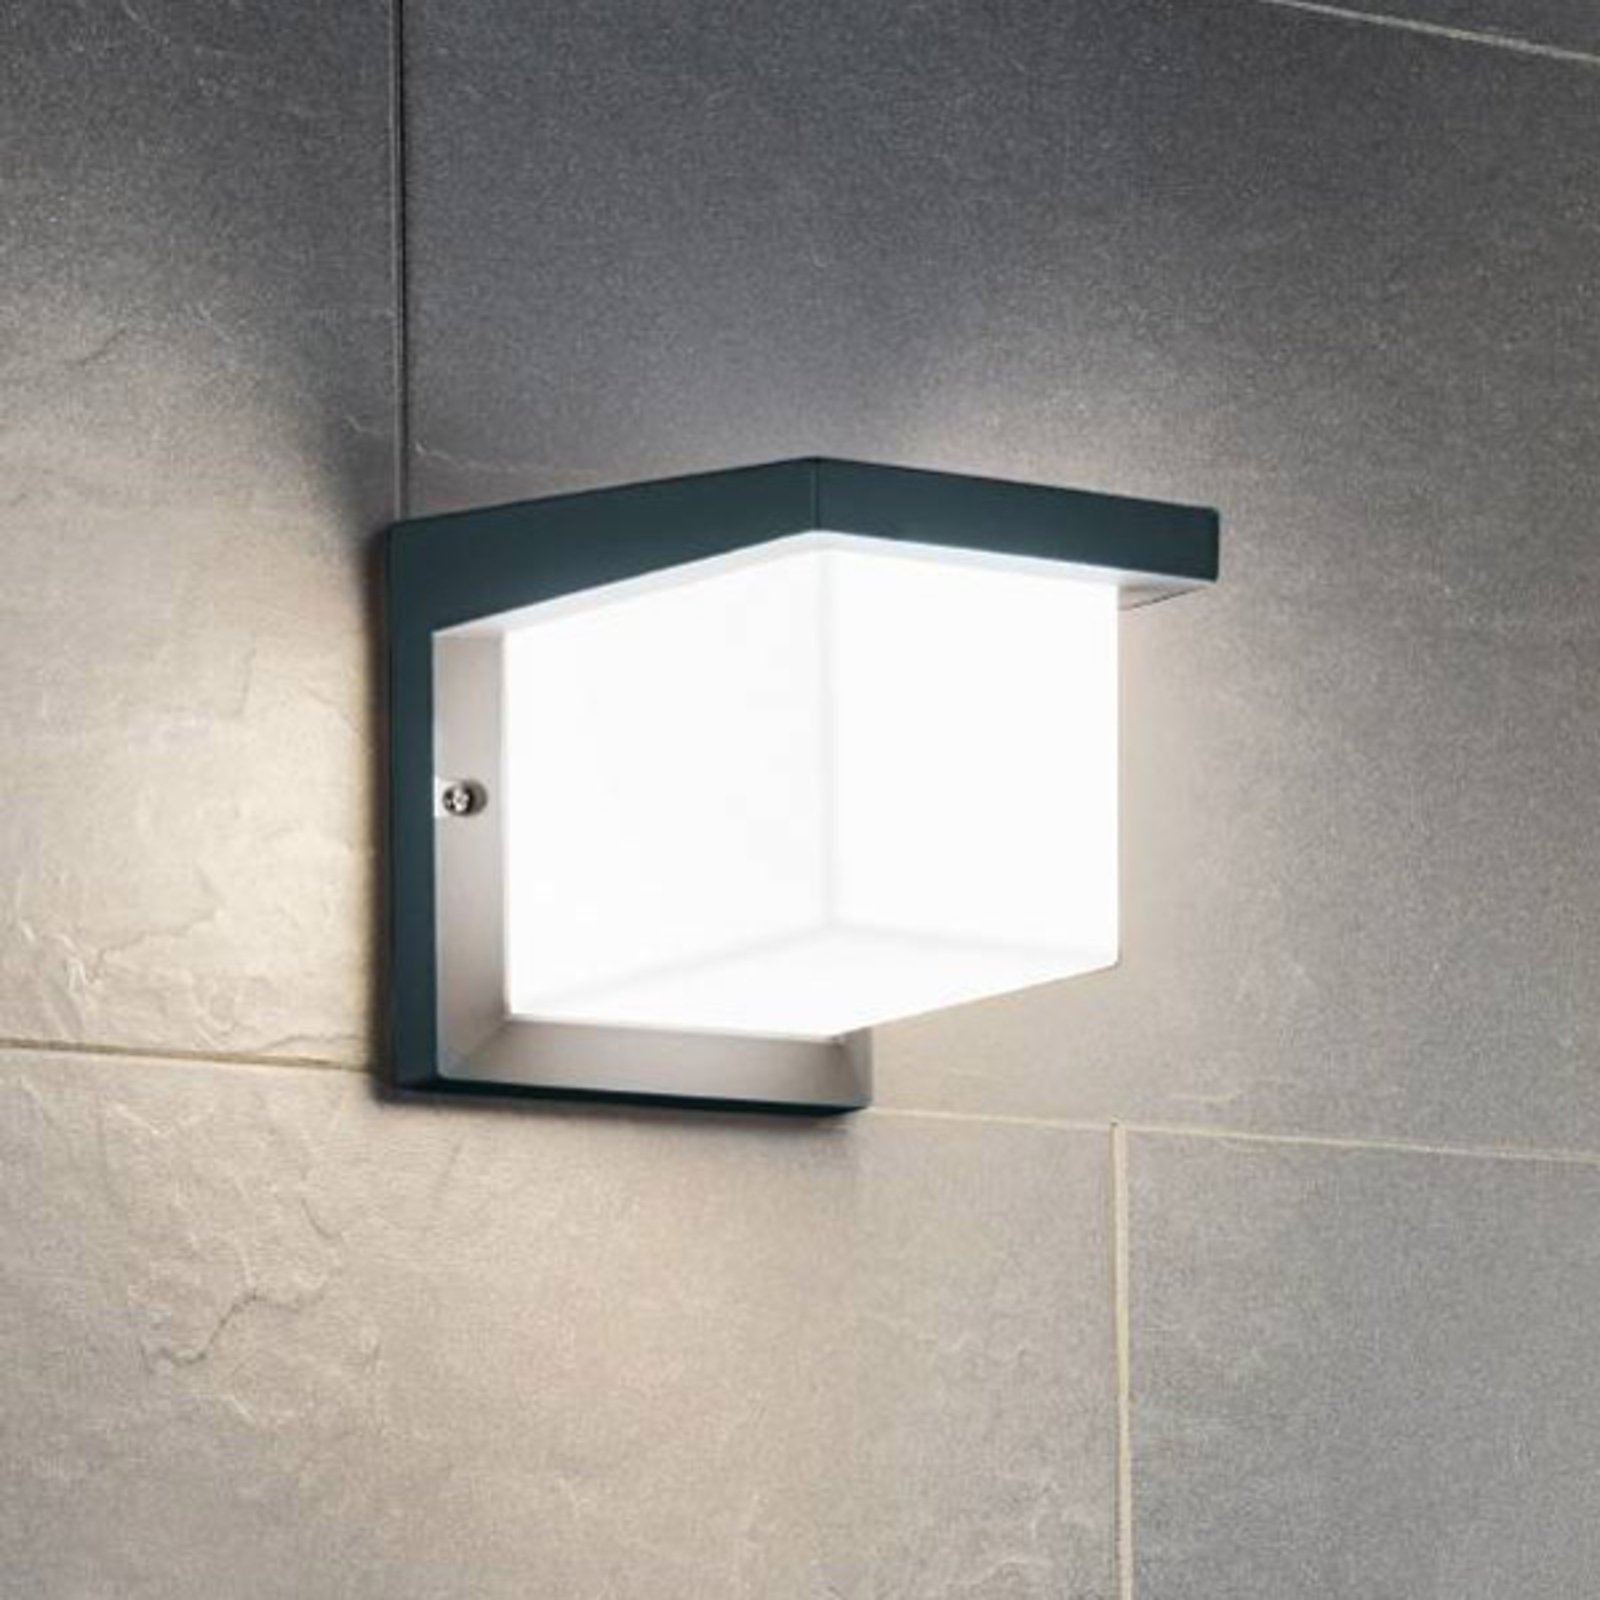 Cube-shaped Desella LED outdoor wall light